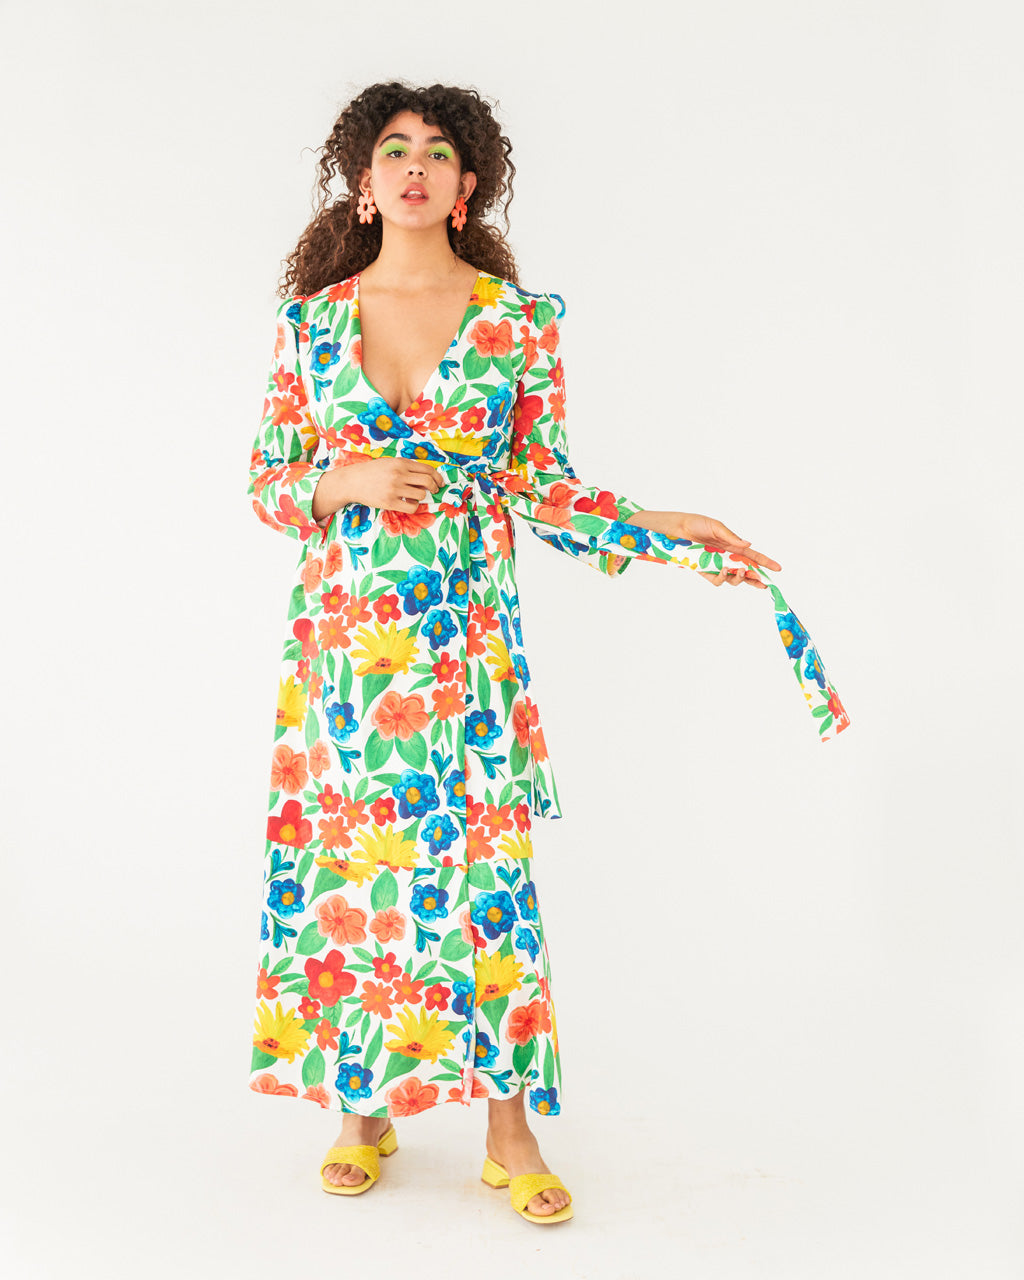 Large Bright Floral Dress by glamorous 